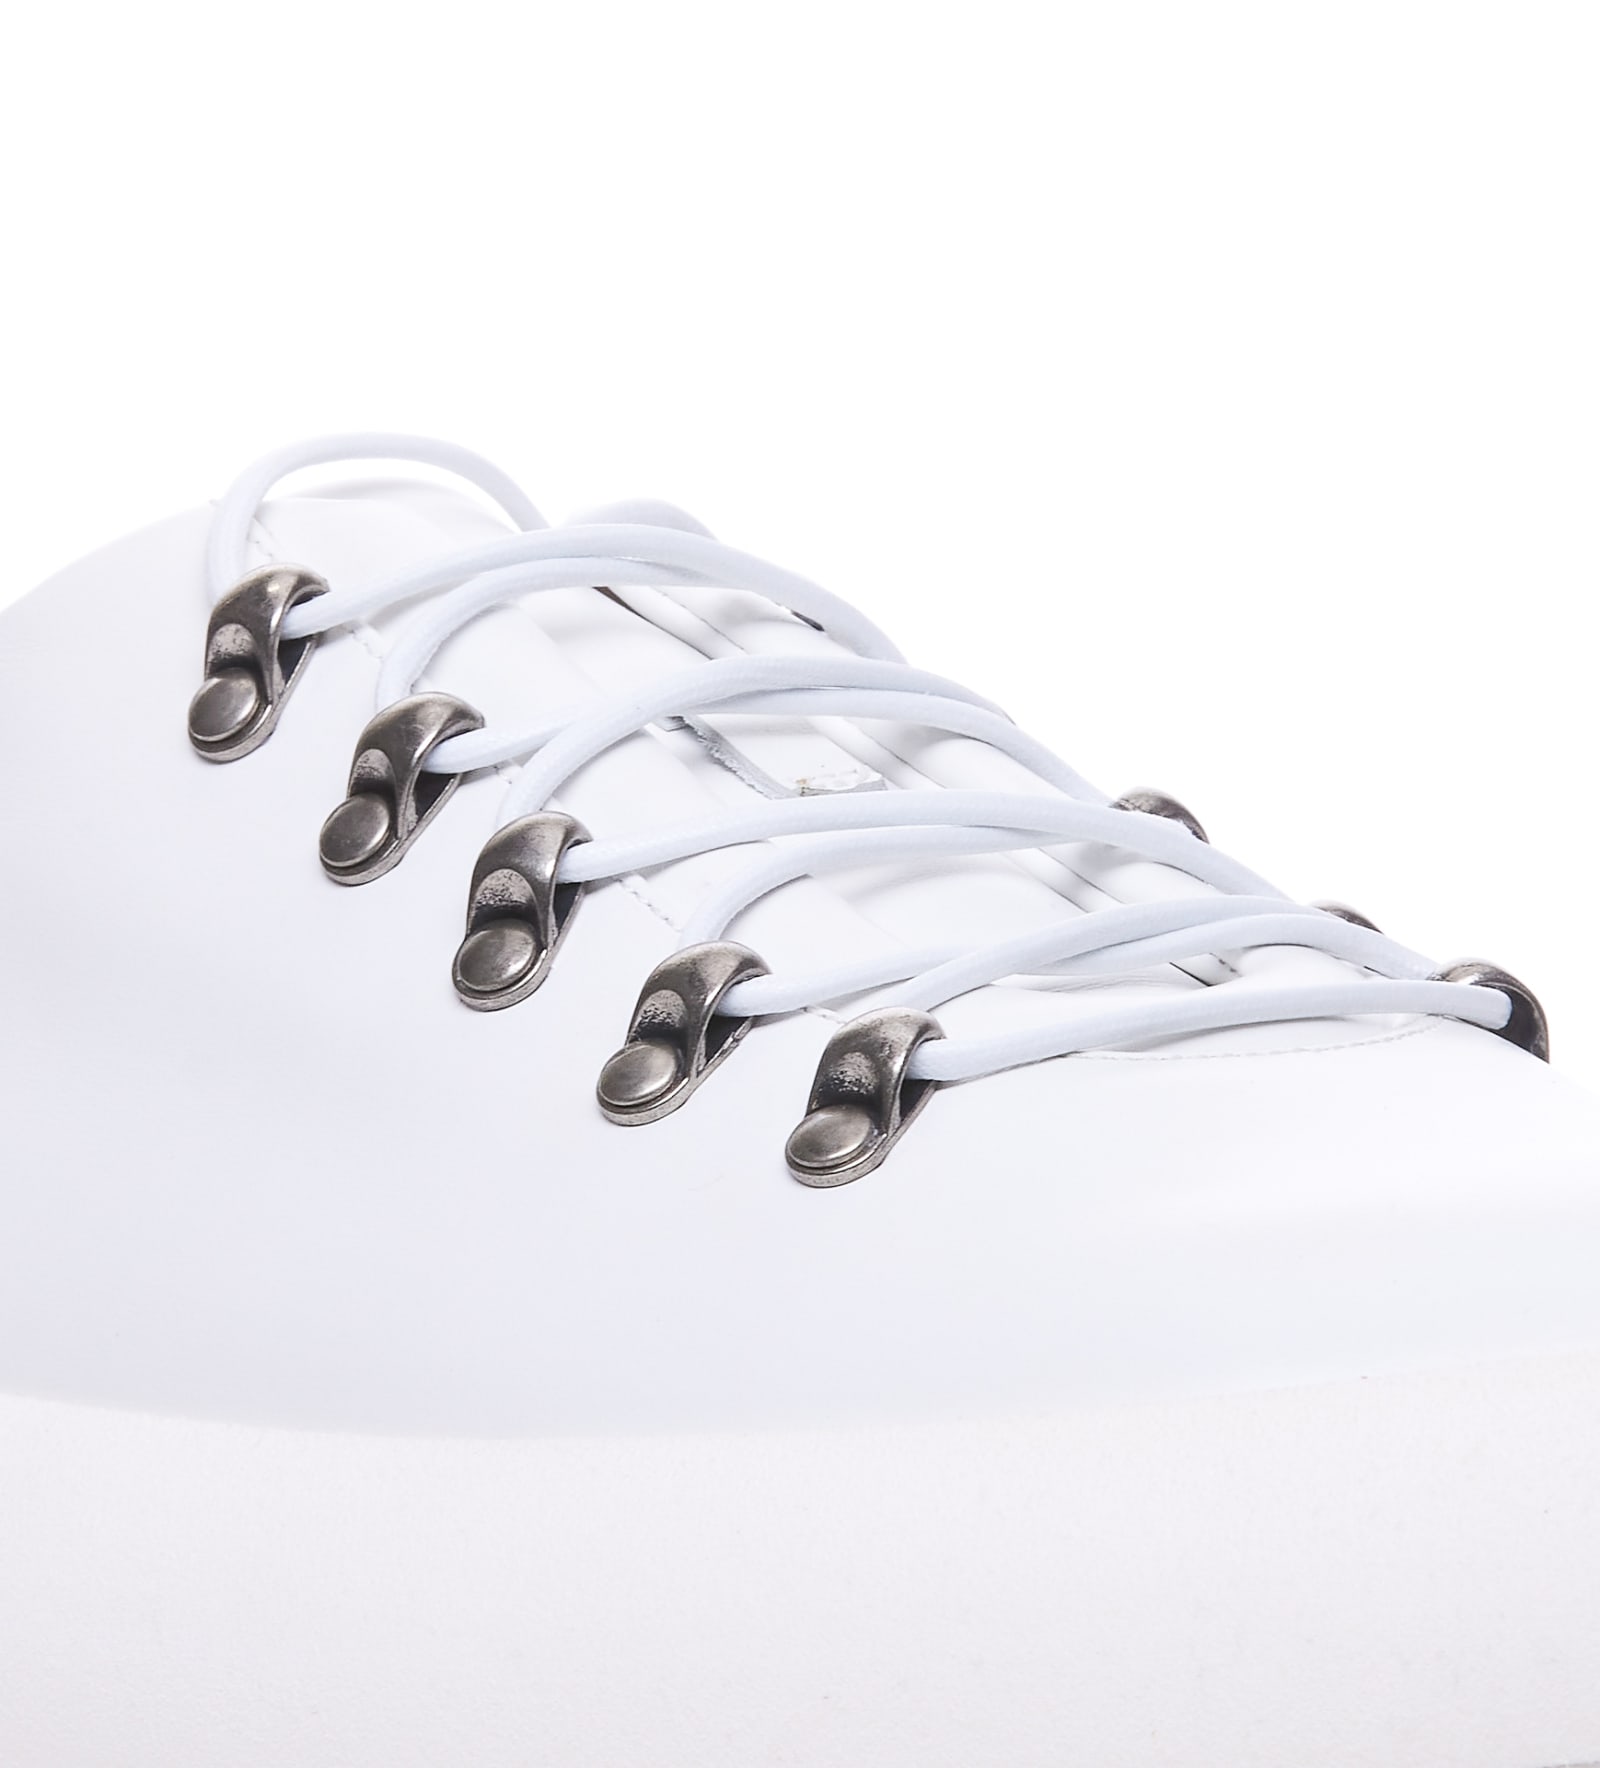 Shop Marsèll Espana Lace Up Shoes In White